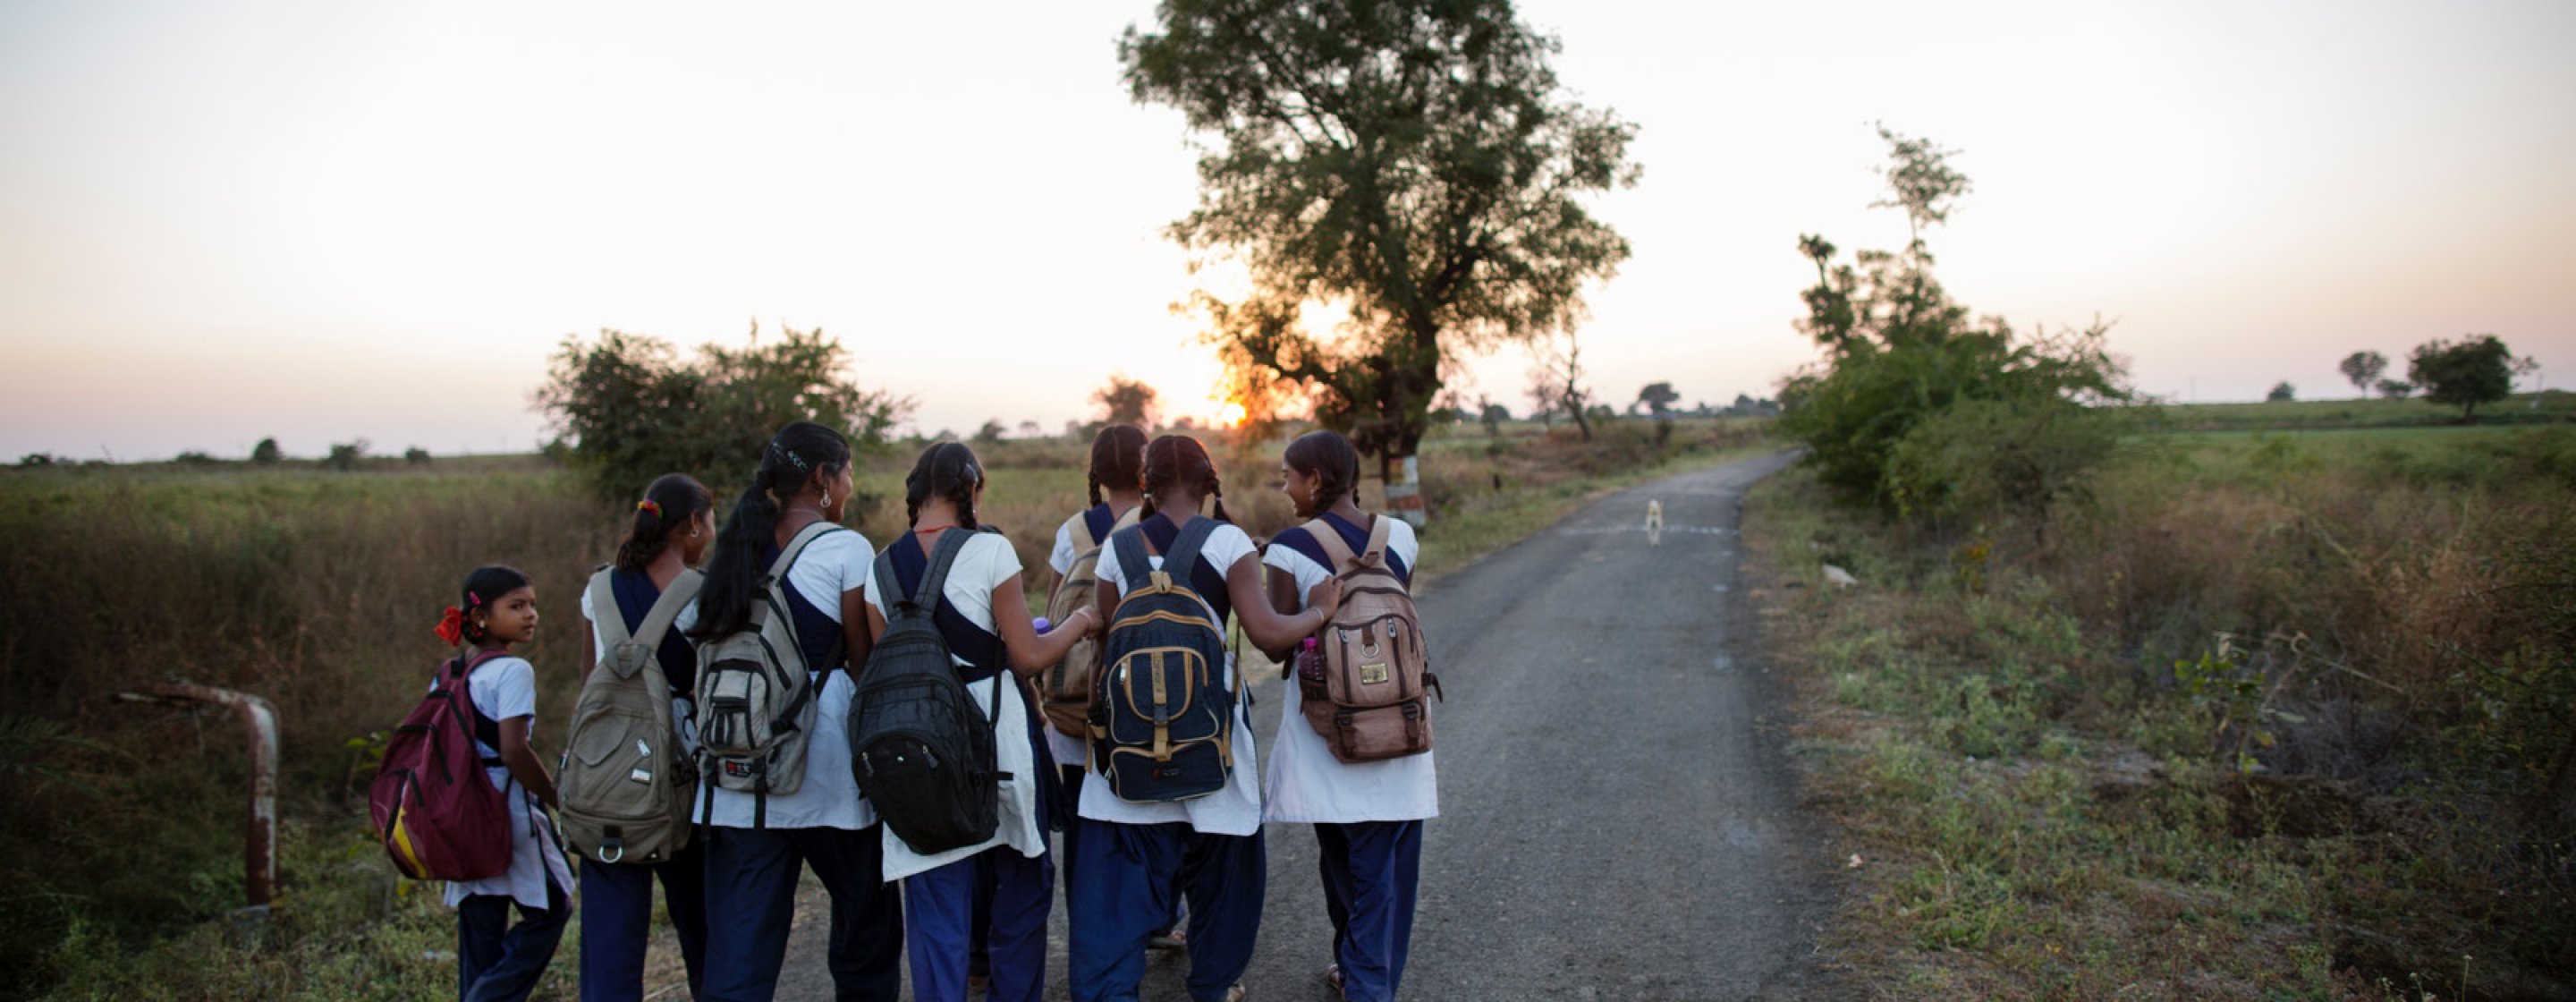 A group of schoolgirls on their way to school.